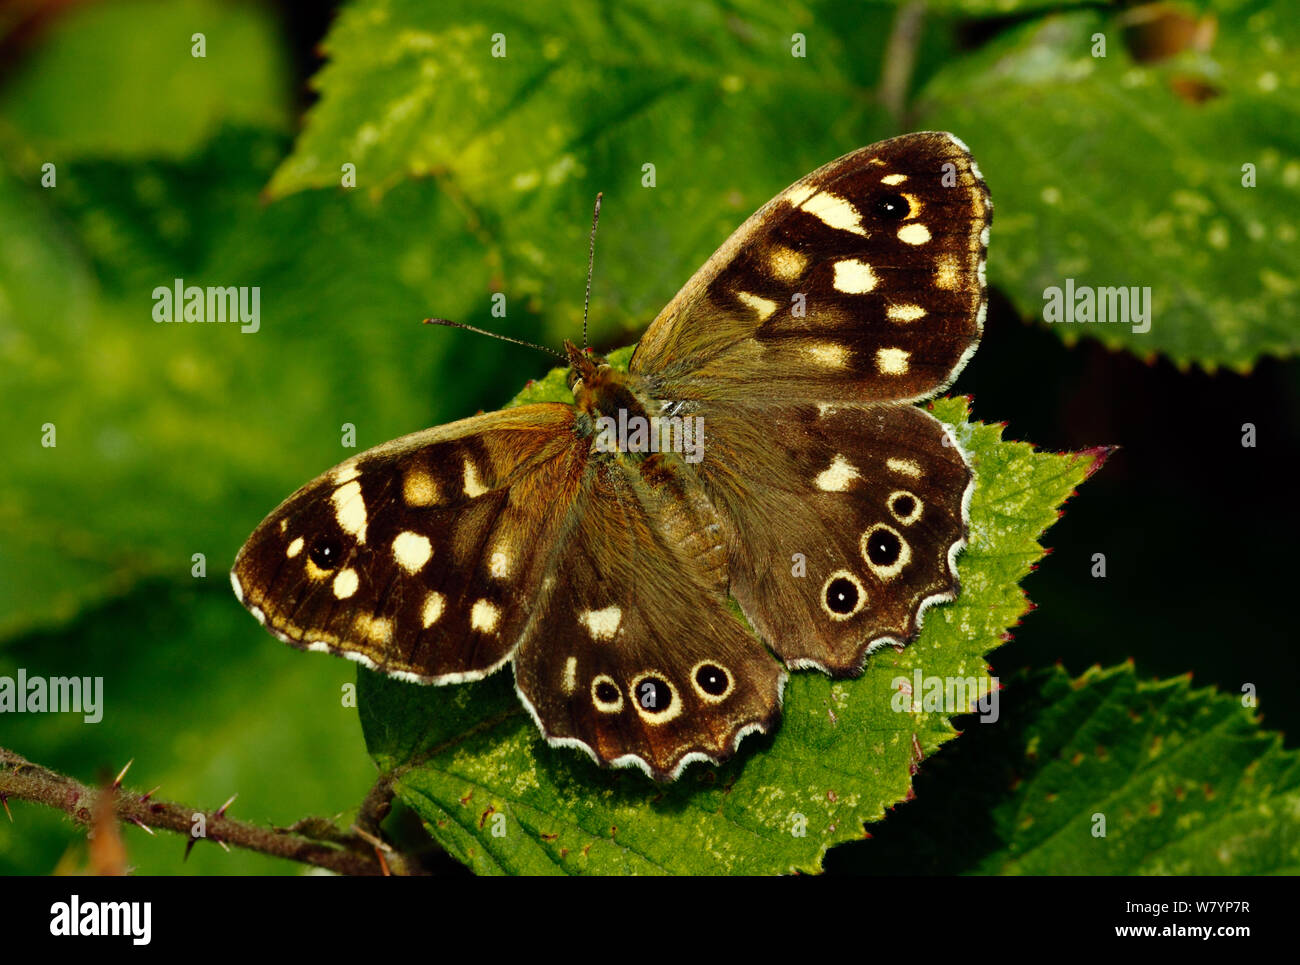 Speckled wood butterfly (Pararge aegeria) resting on bramble leaf, South-west London, UK Stock Photo